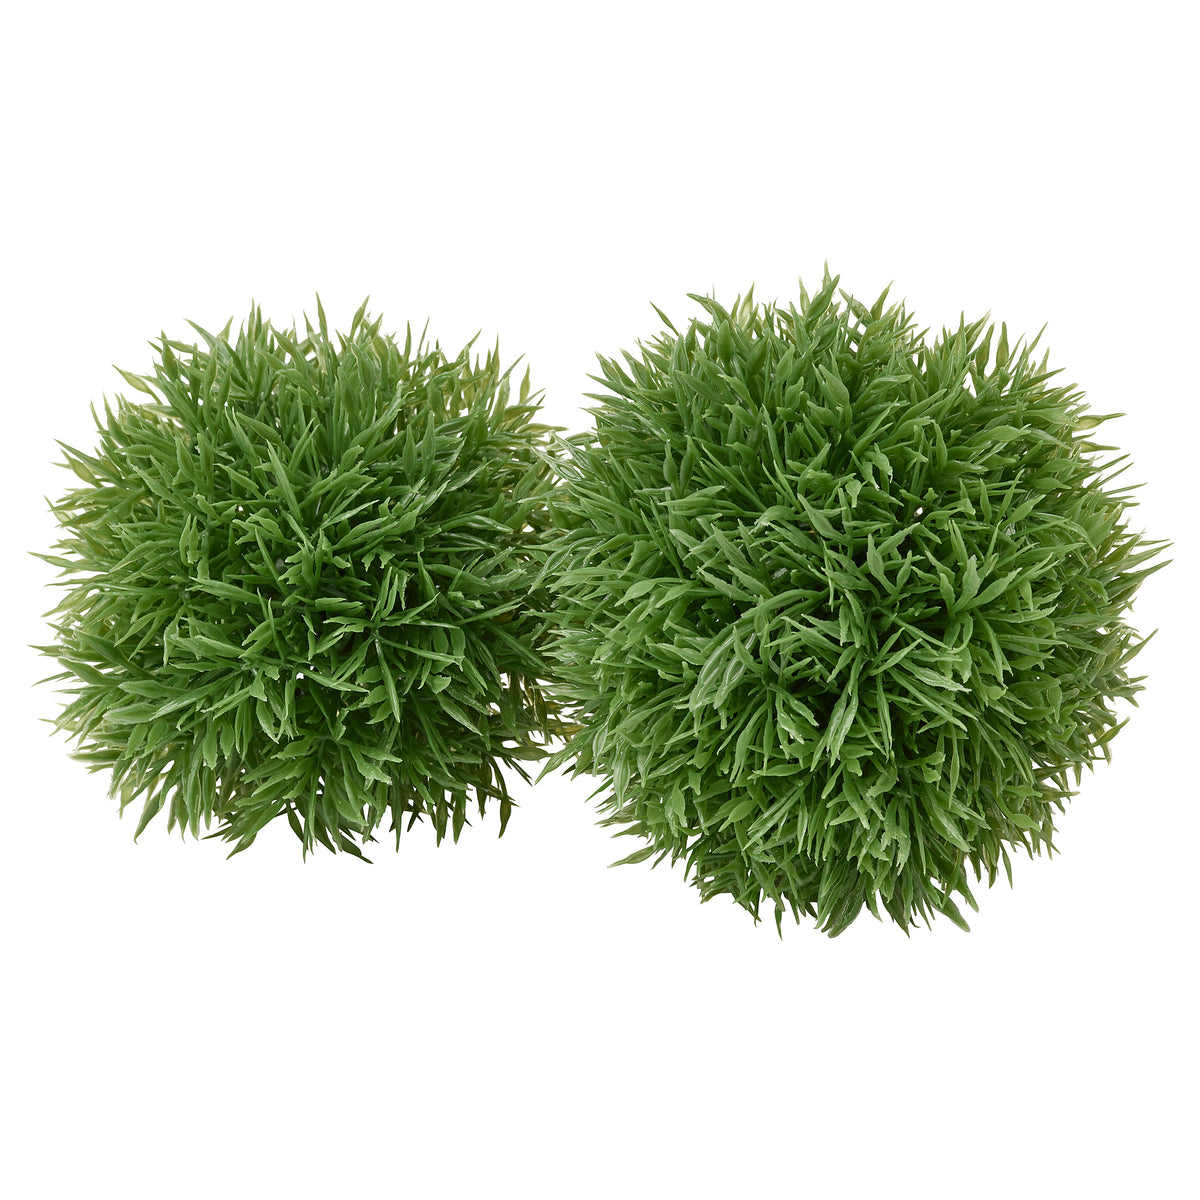 IKEA FEJKA Artificial Plant, Set of 2, In-Outdoor-Grass Ball Shaped